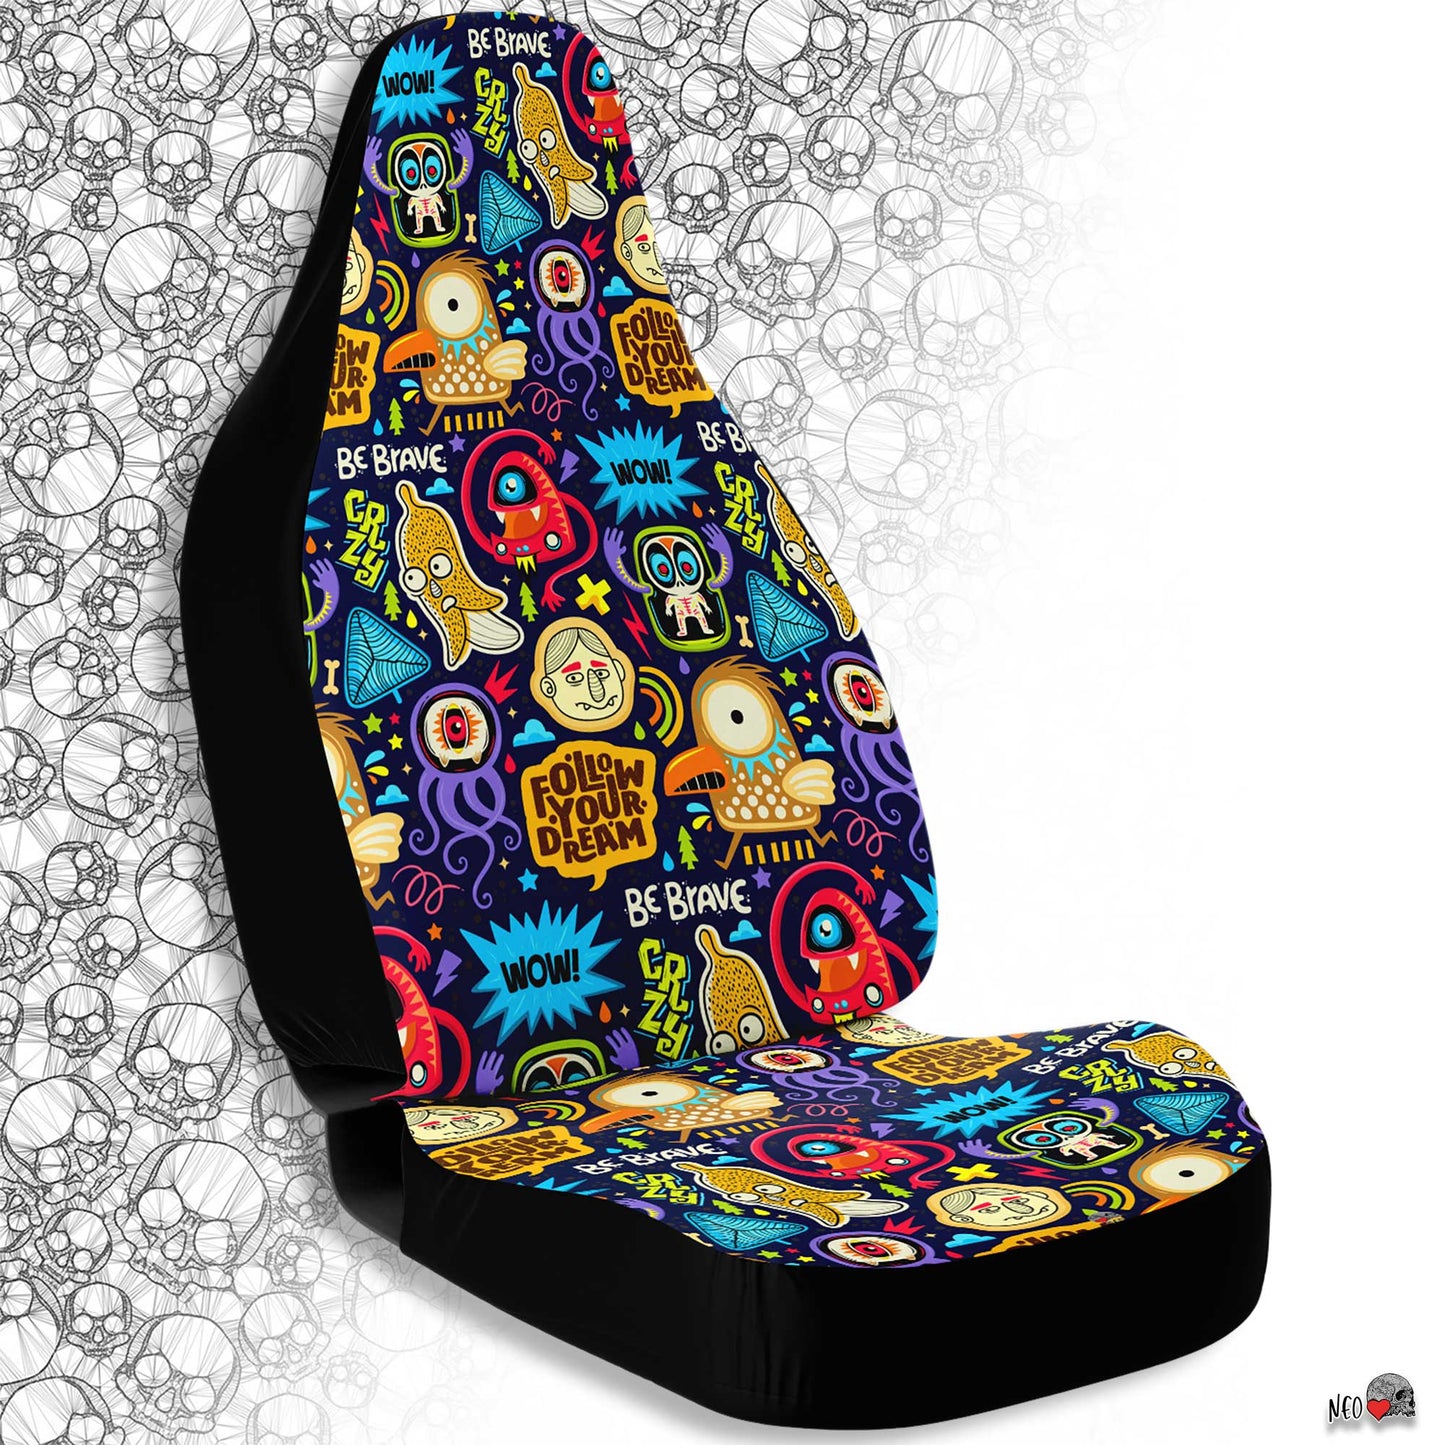 Follow Your Dream Car Seat Covers